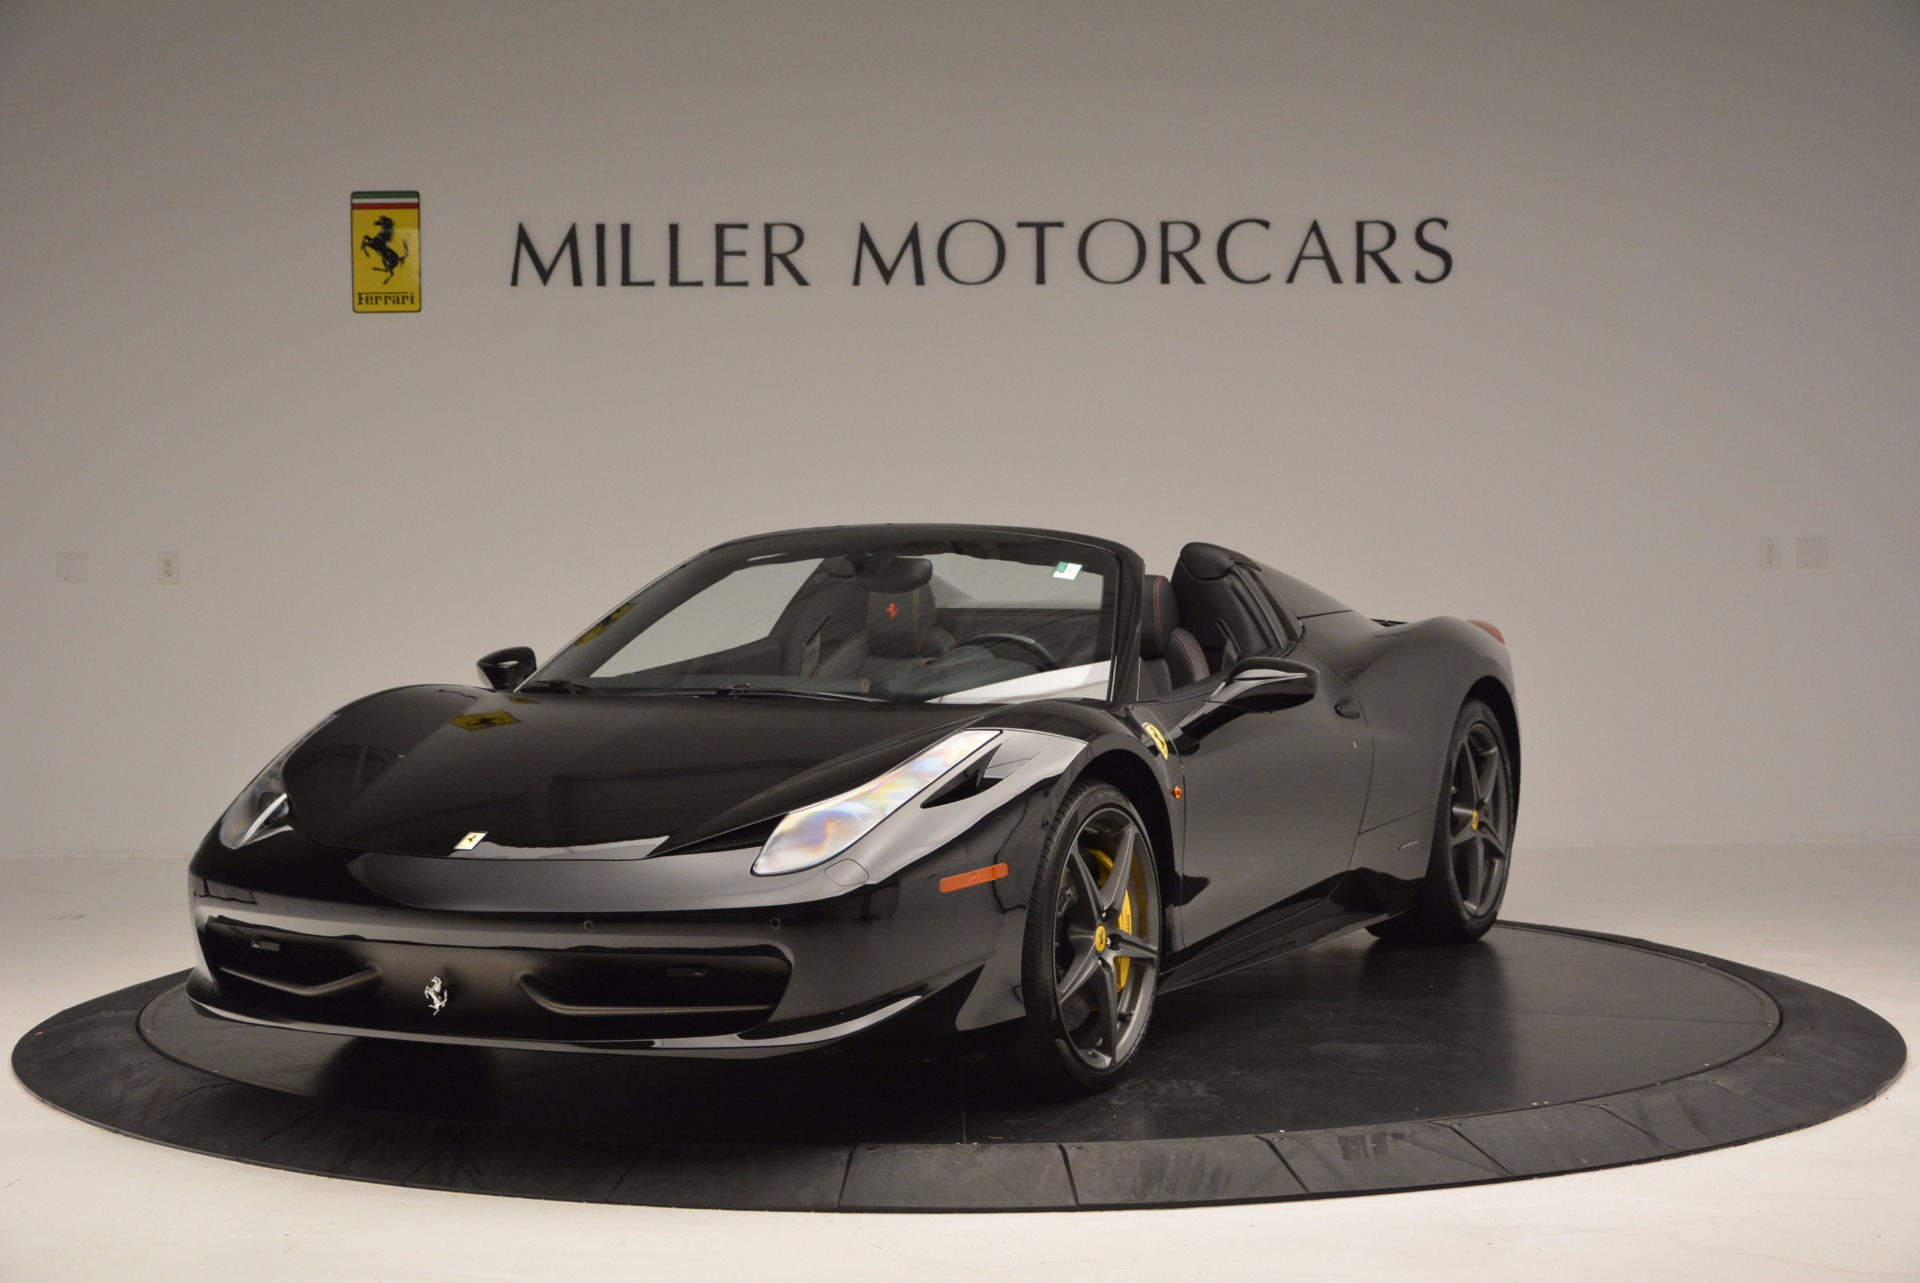 Used 2014 Ferrari 458 Spider for sale Sold at Bentley Greenwich in Greenwich CT 06830 1